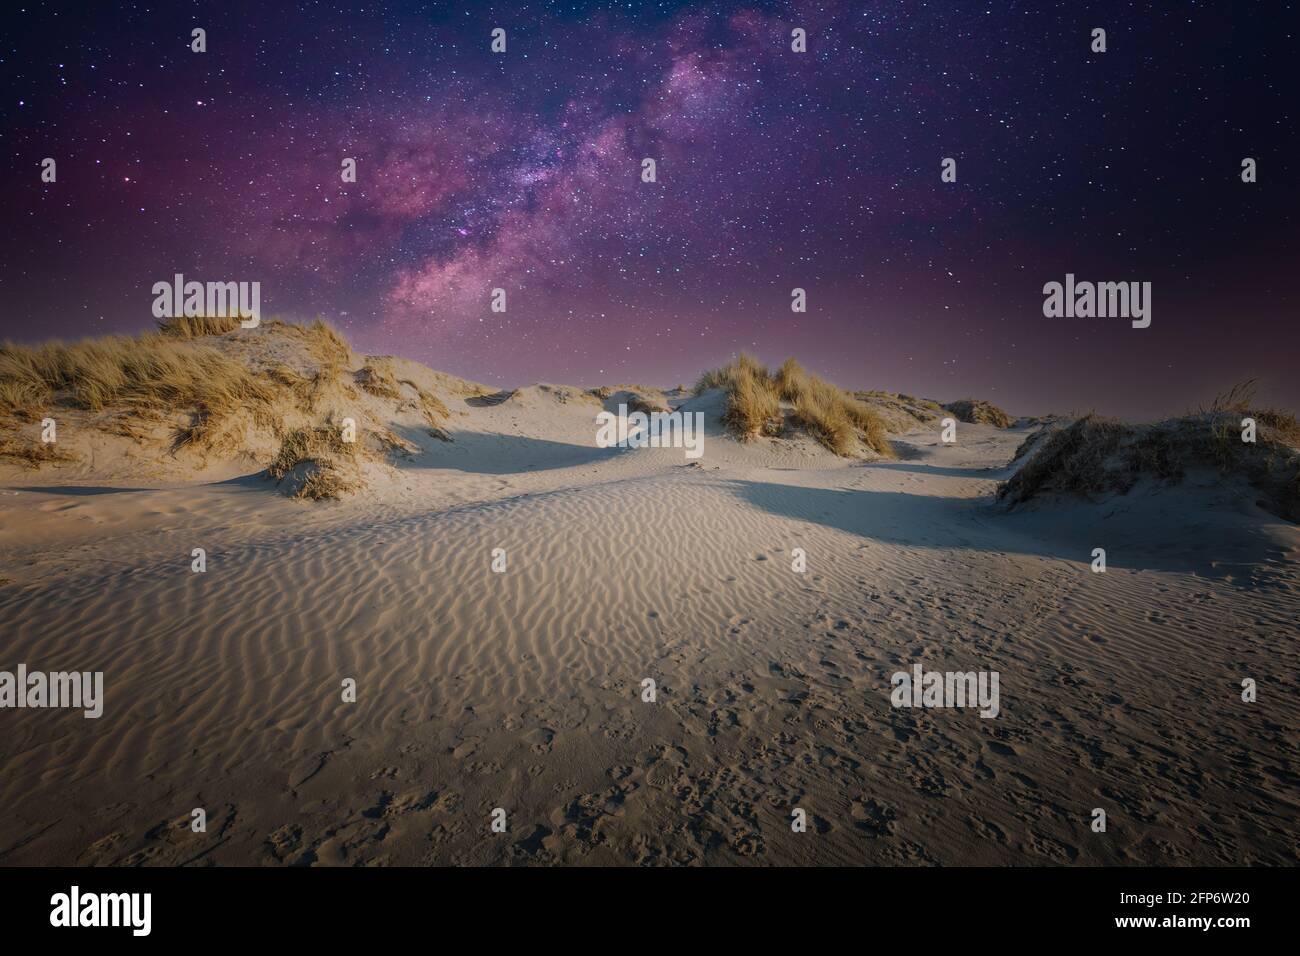 Night image of dune landscape with starry sky with purple and violet starlight against dark blue sky background Stock Photo